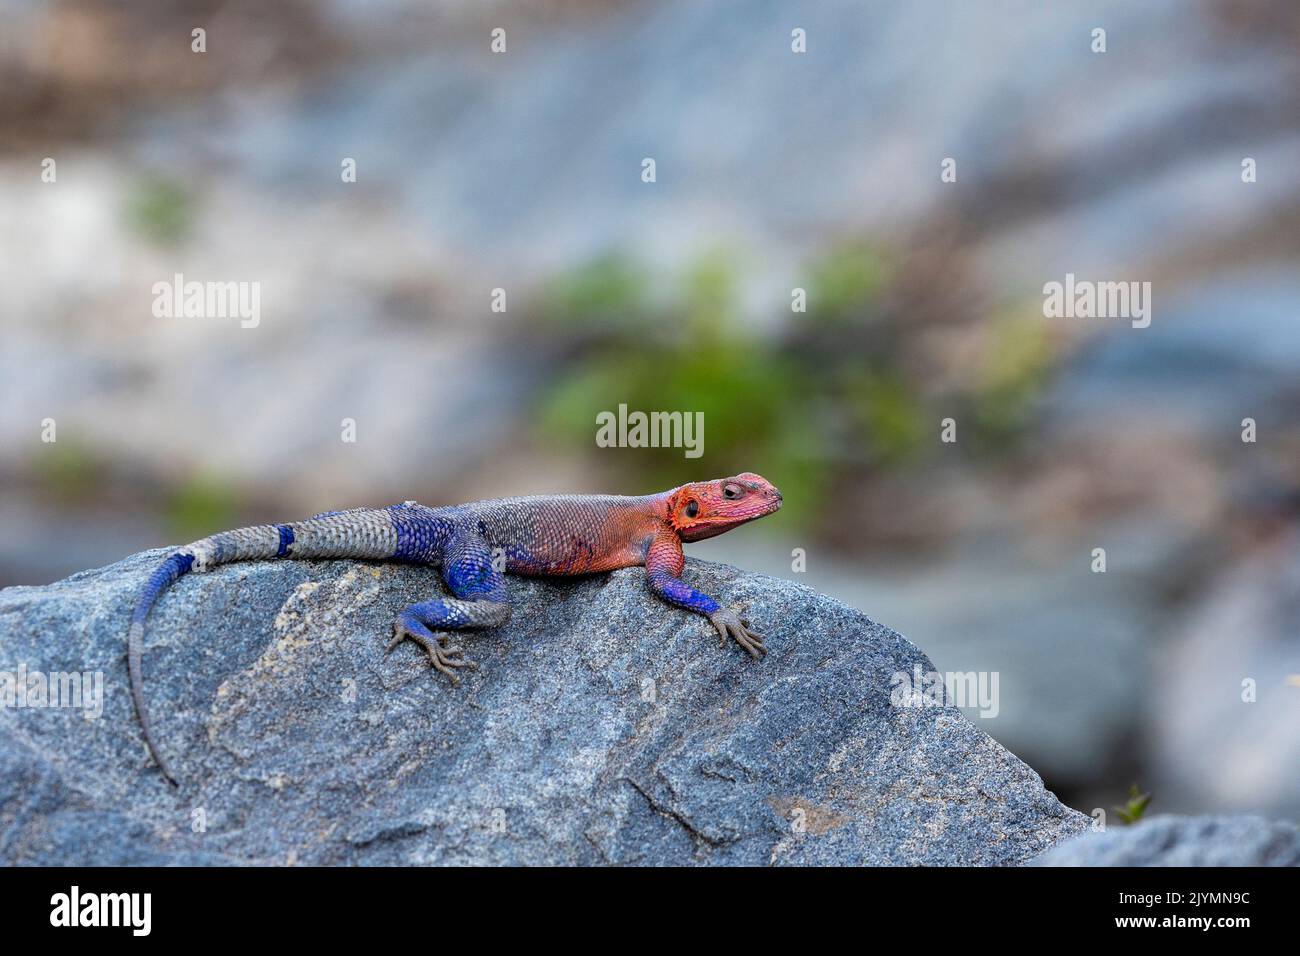 Common agama, red-headed rock agama, or rainbow agama (Agama agama) on a rock. The male is very colorful, the female is gray, Masai Mara National Reserve, National Park, Kenya, East Africa, Africa Stock Photo